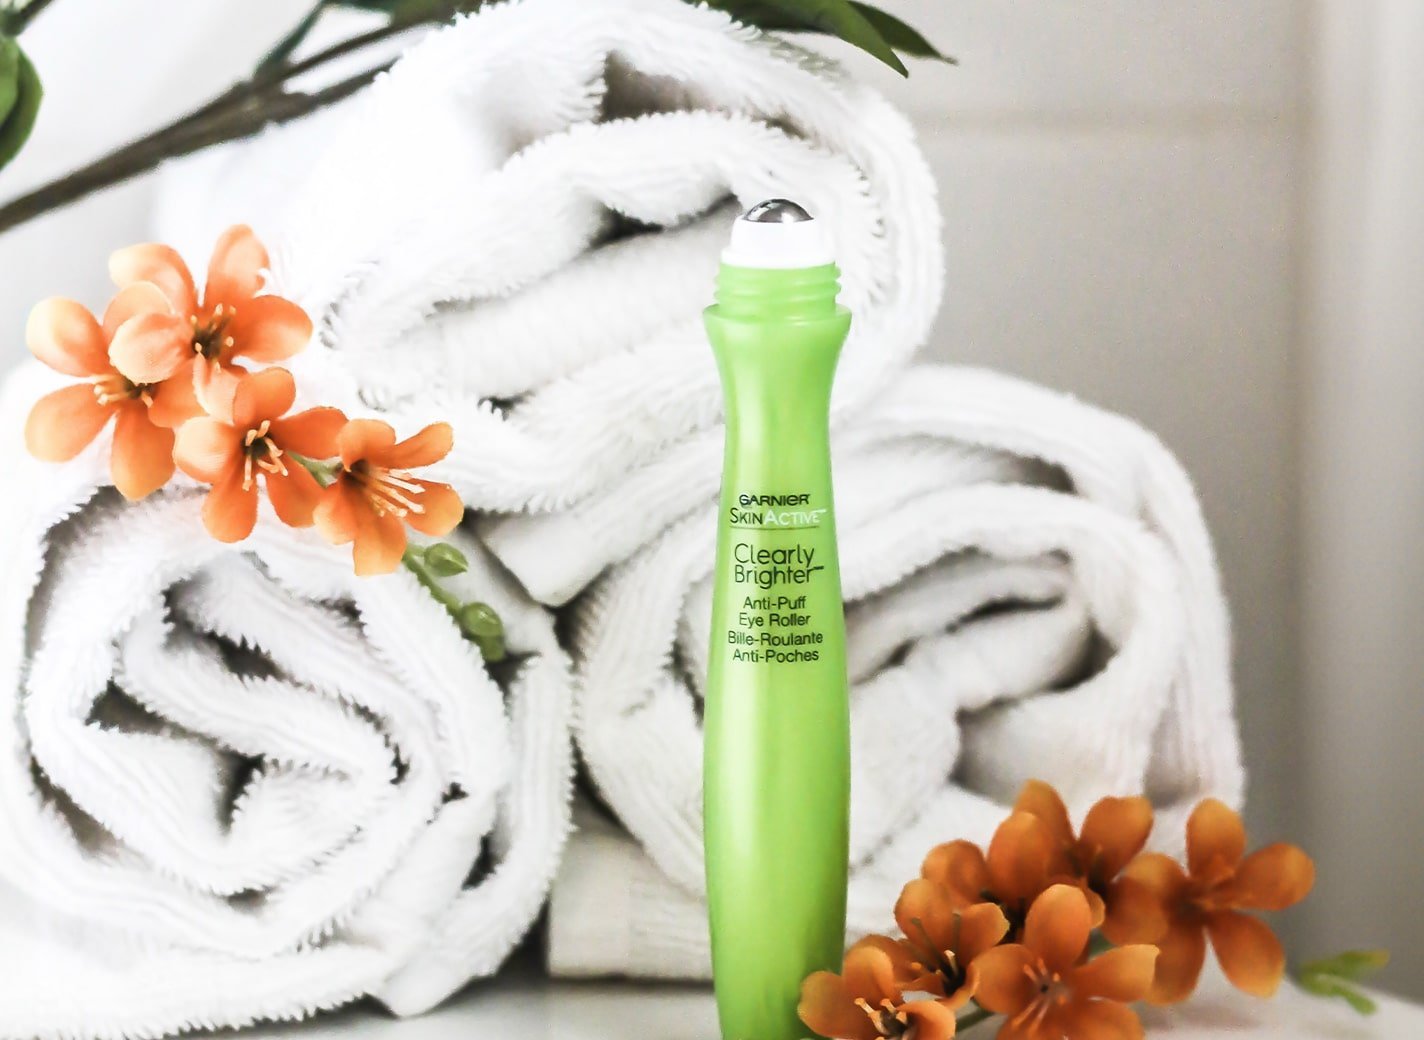 Garnier brightening eye rollers with towels and flowers